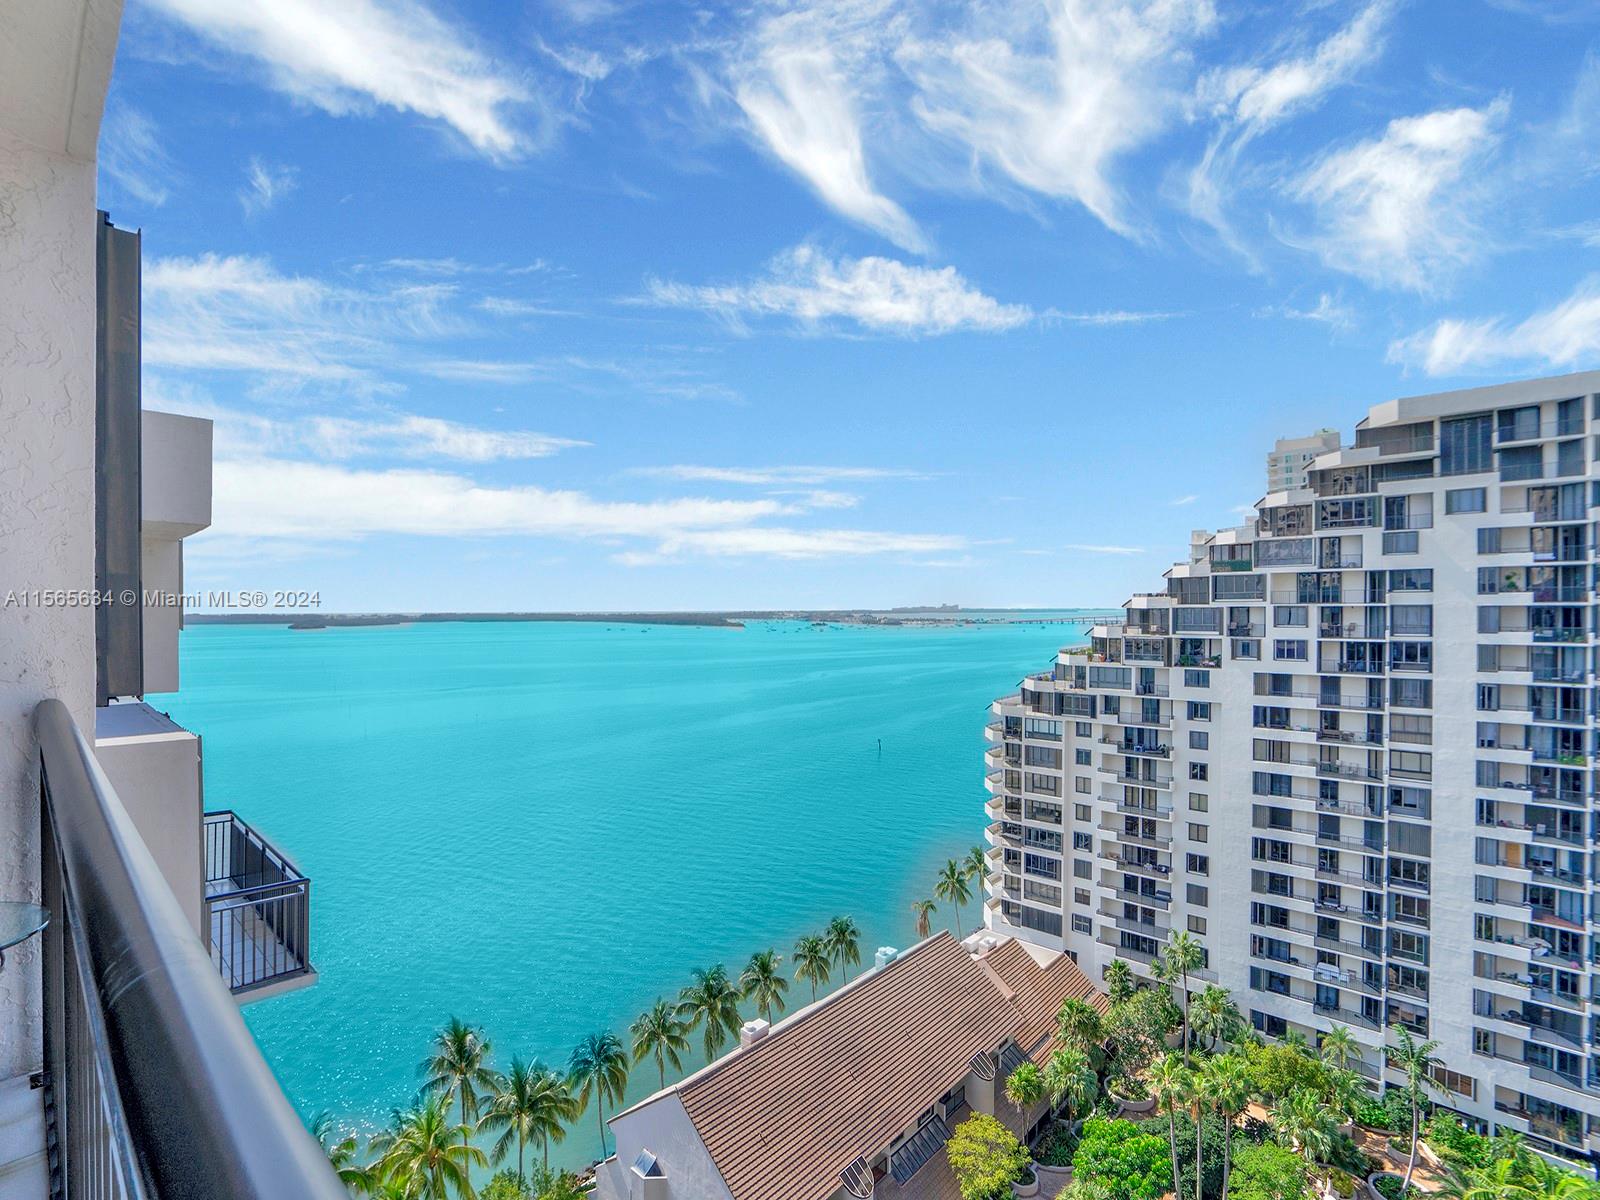 Immaculate, completely remodeled 2/2 Penthouse, with higher ceilings. Desirable Southern pool, bay and city skyline views. White porcelain tiles throughout. Open kitchen with an island. Jack and Jill bathroom for guests. Both bedrooms have a large closet, both of them are completely built out. Brickell Key II has a remodeled entrance, lobby, gym and pool. New elevators are close to complete and hallway remodel has been started. The pool has bay access to the Island boardwalk, perfect for peaceful bay walks. Enjoy this Island oasis, with great restaurants, a marketplace, and two parks, only a short walk to the center of Brickell, Mary Brickell and Brickell City Center. The building requires all tenants to get RENTER"S INSURANCE. The Unit can be rented partially FURNISHED